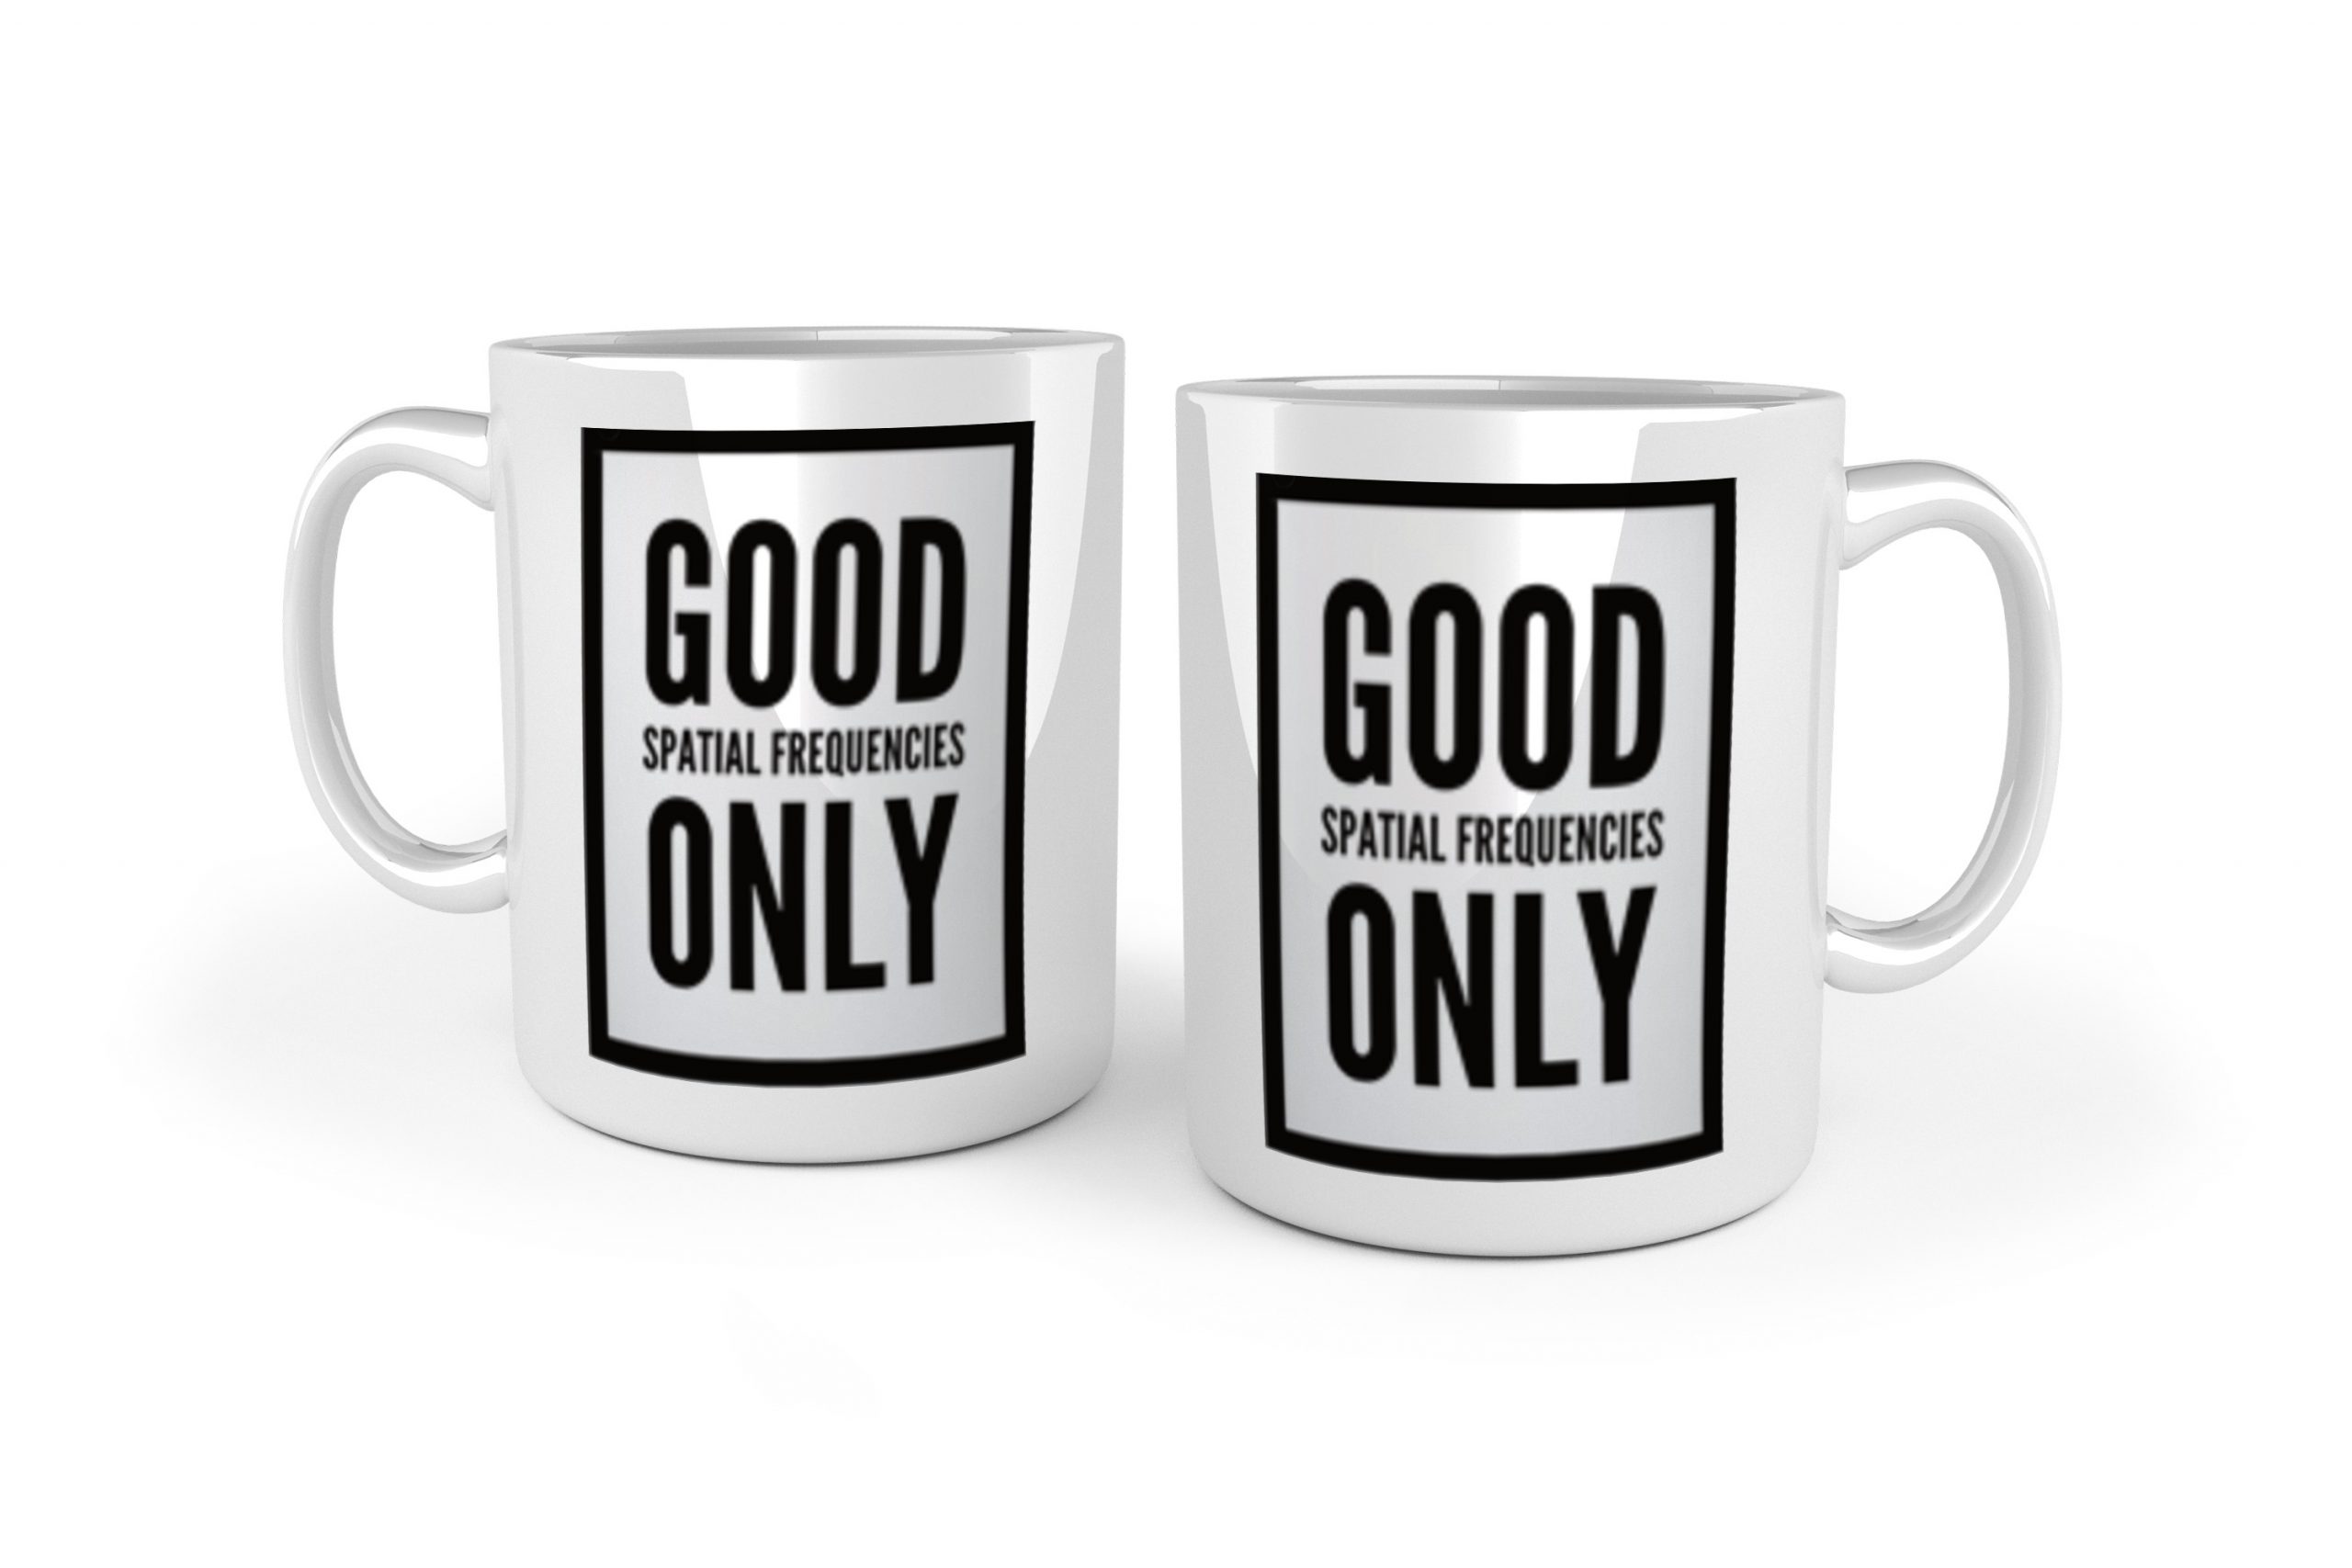 Good Spatial Frequencies Only white ceramic optometry mug